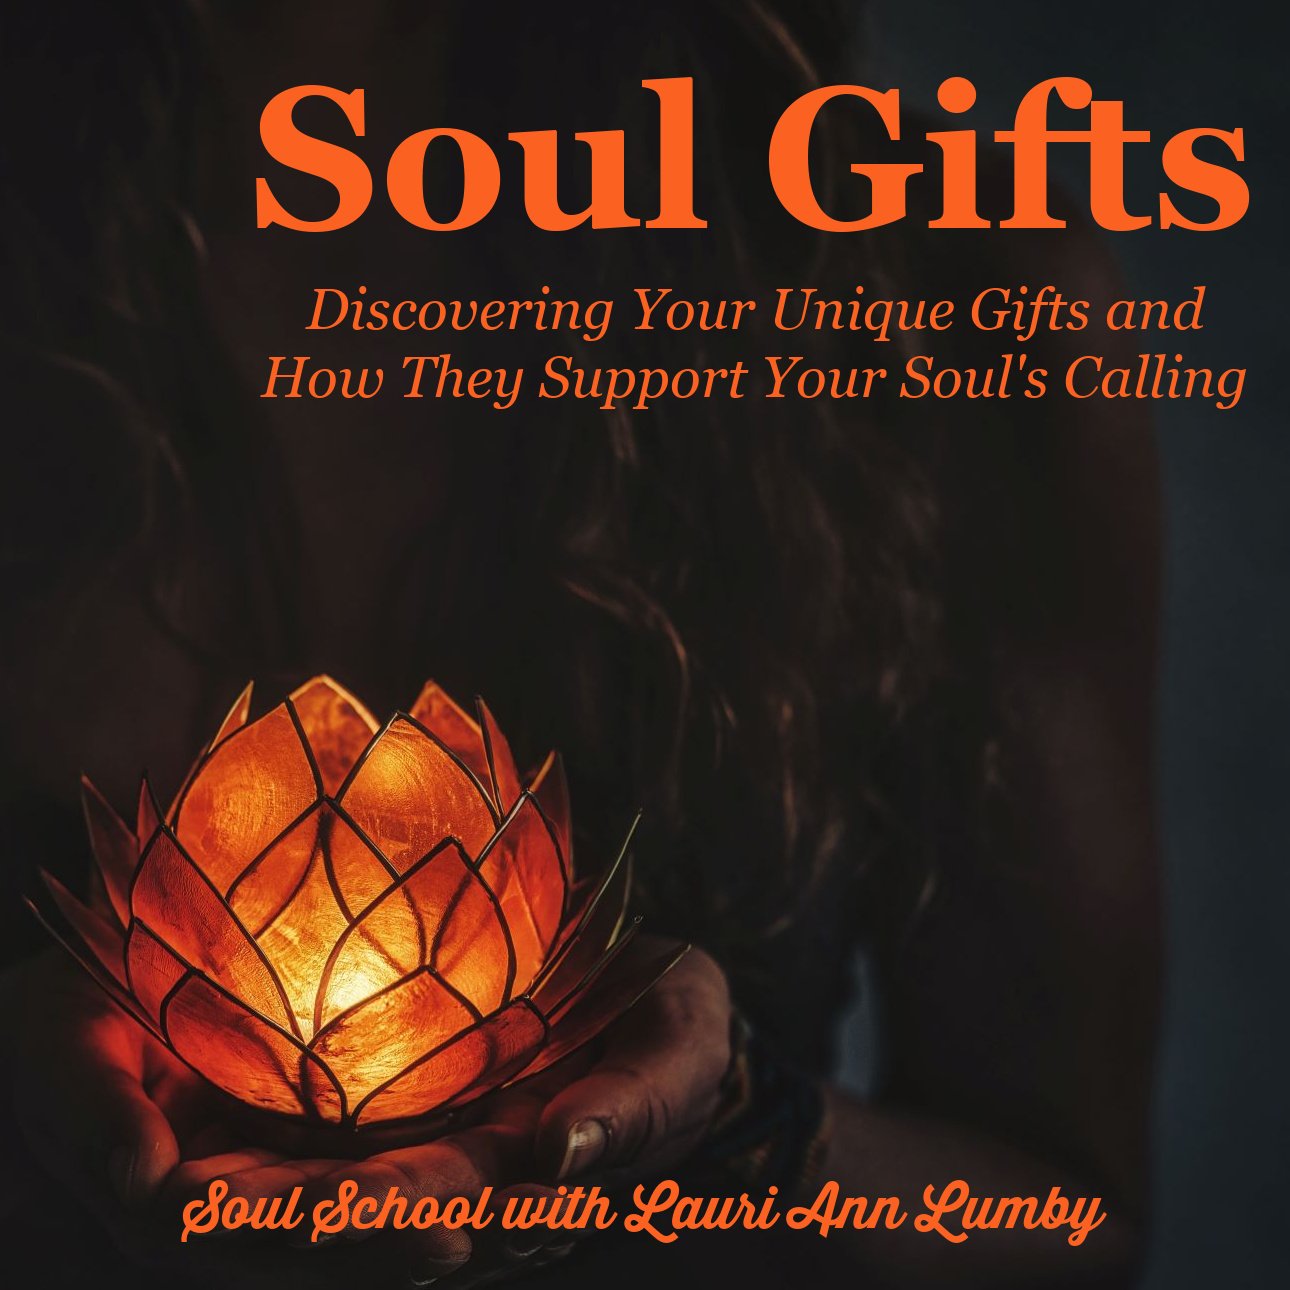 Soul Gifts - Discover Your Unique Gifts and How They Support Your Soul's Calling